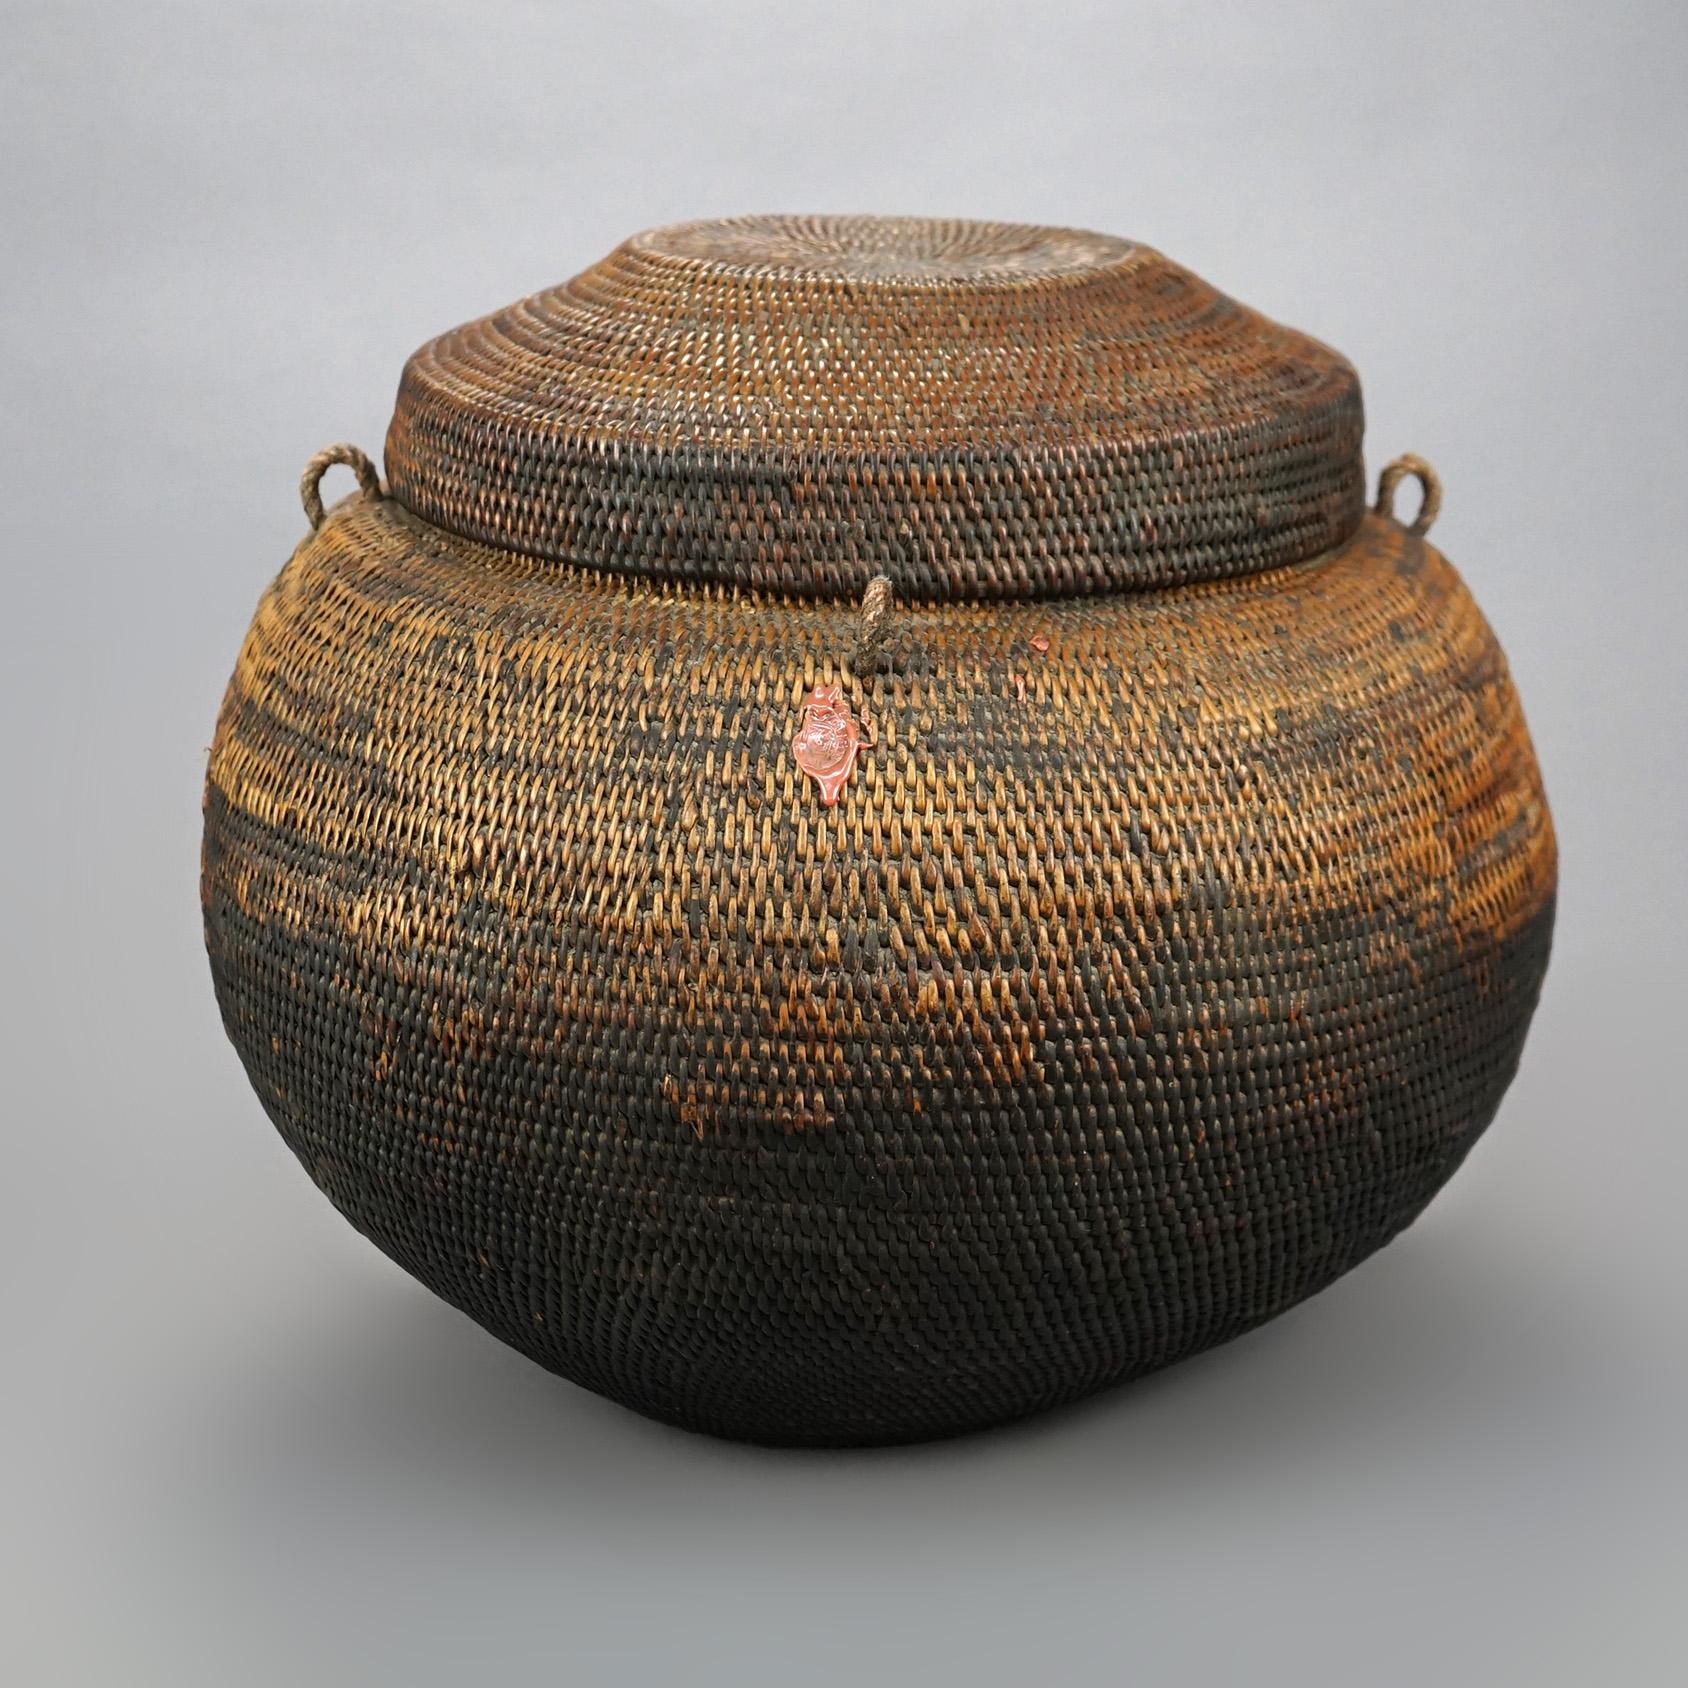 A large South American Lidded Wicker Basket in Spherical Form, 20th century.

Measures - 14.5